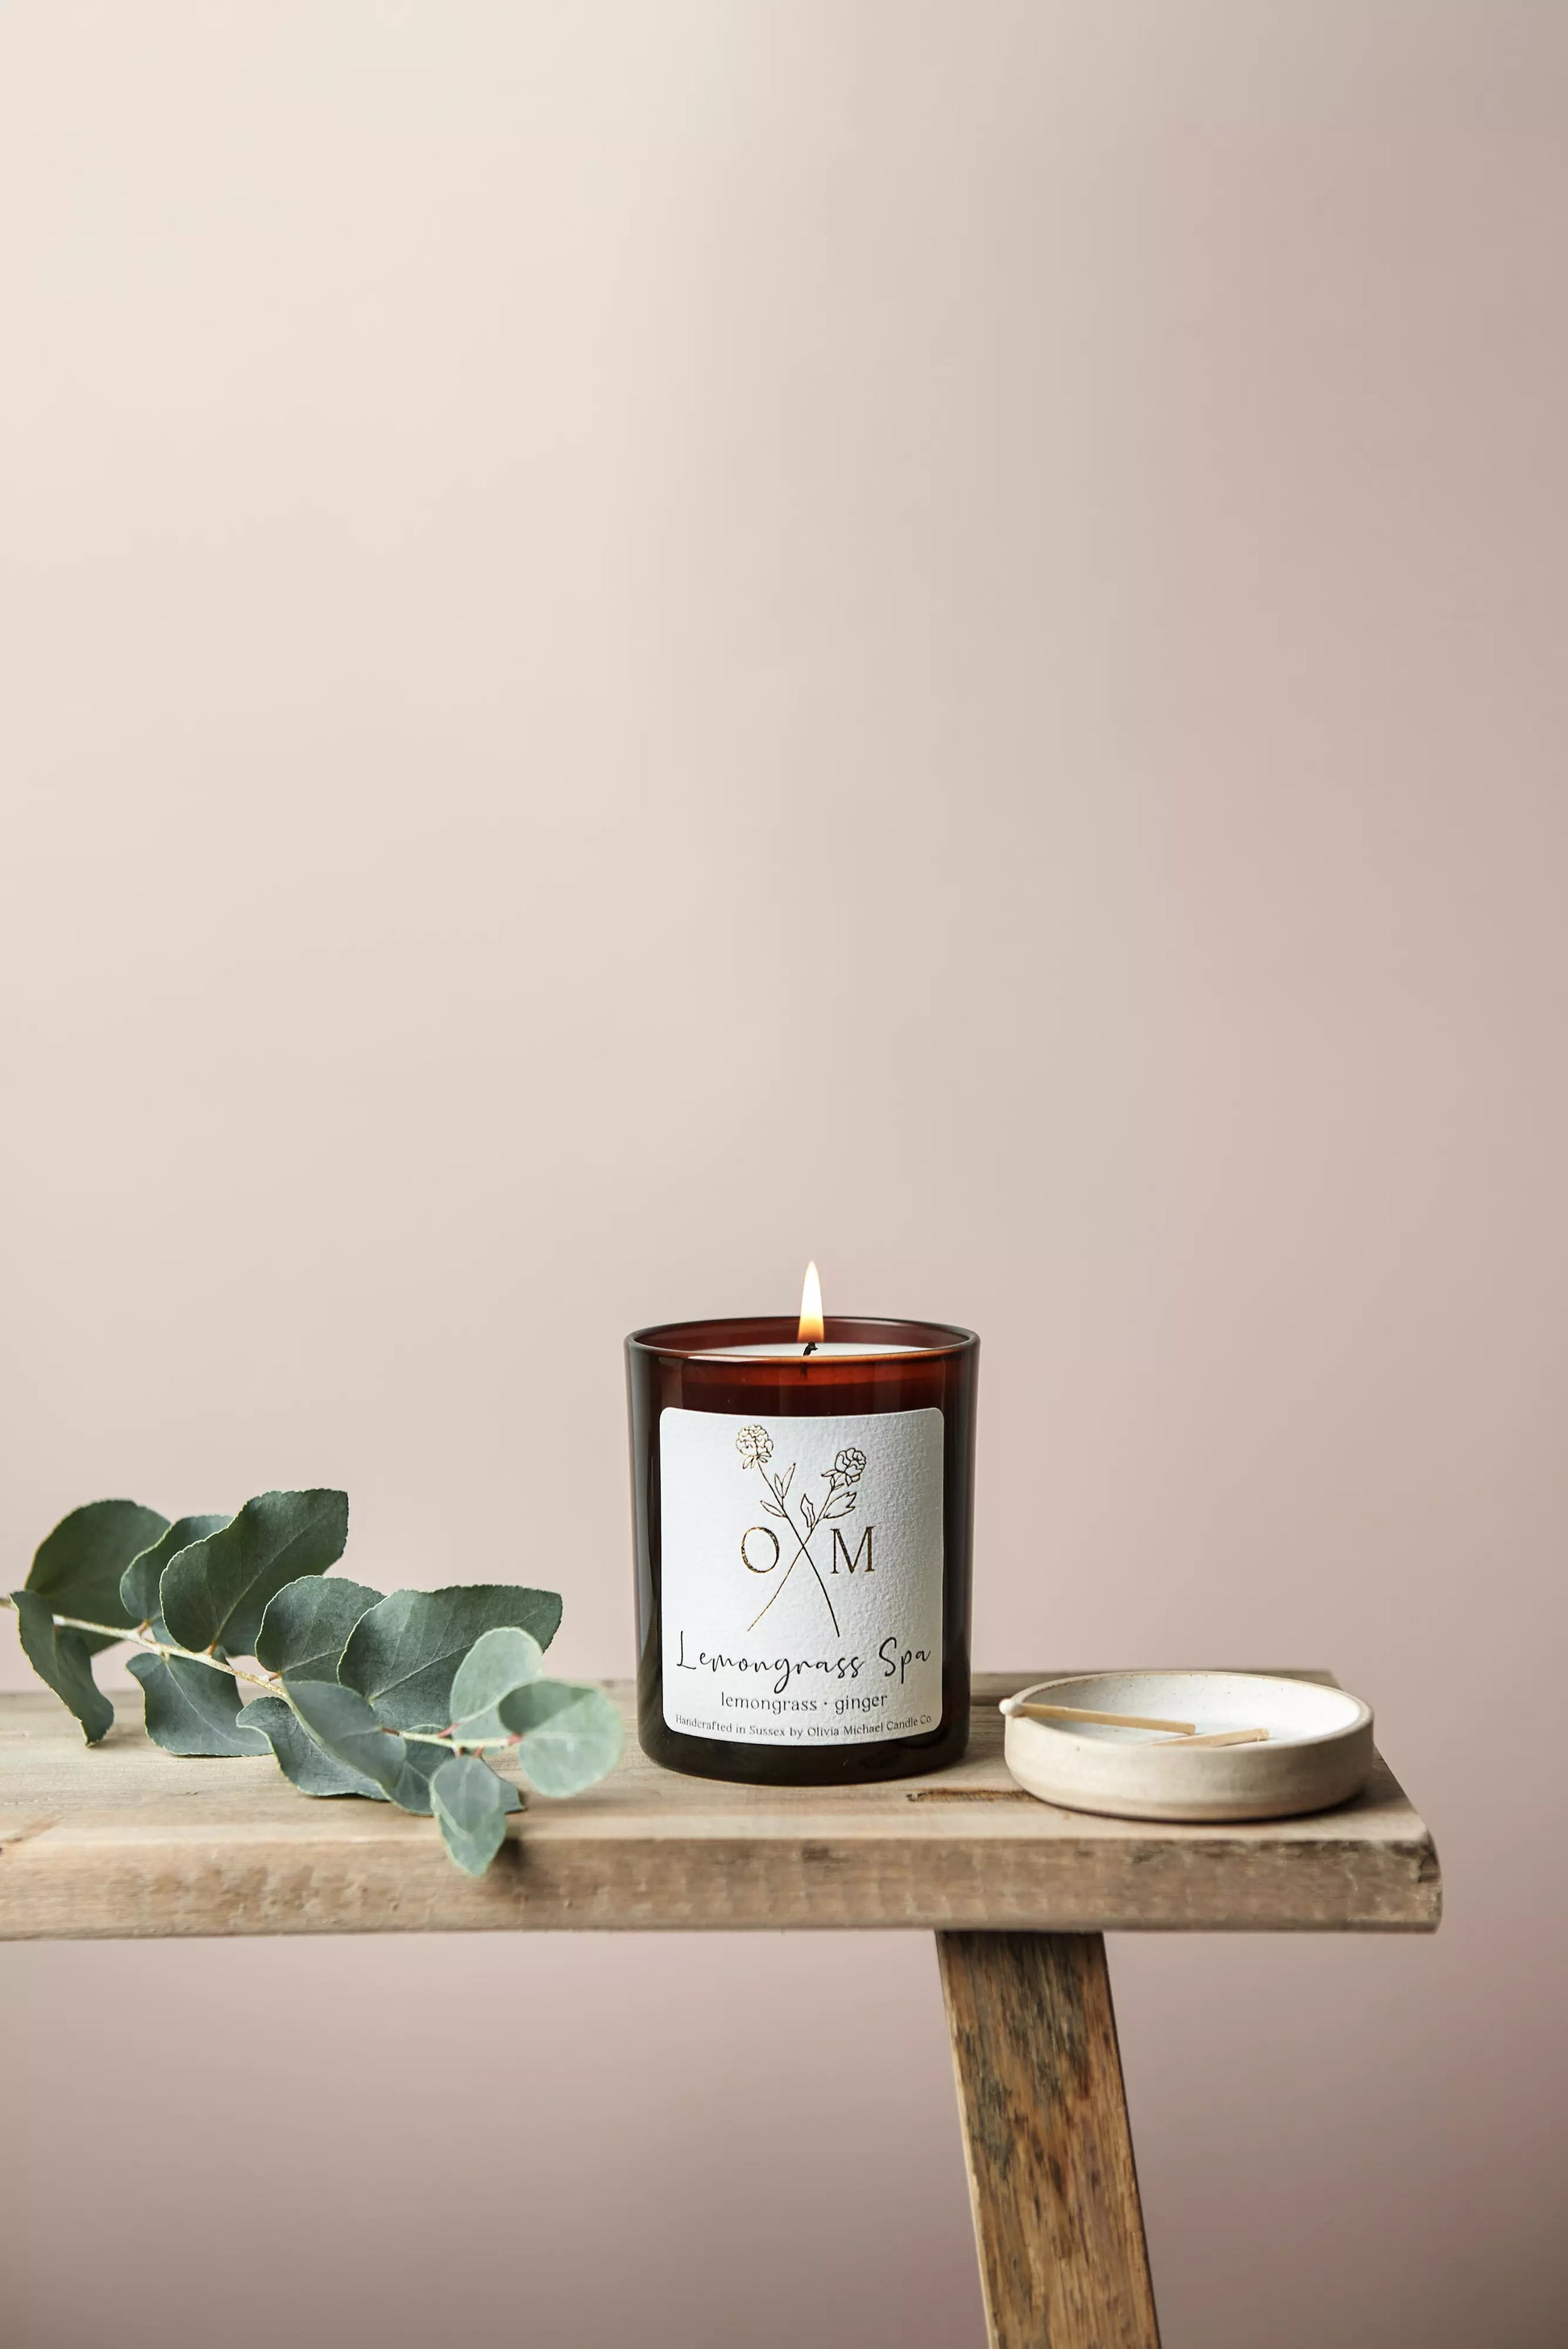 Our Lemongrass Spa scented candle is lit and on display in an amber glass jar.